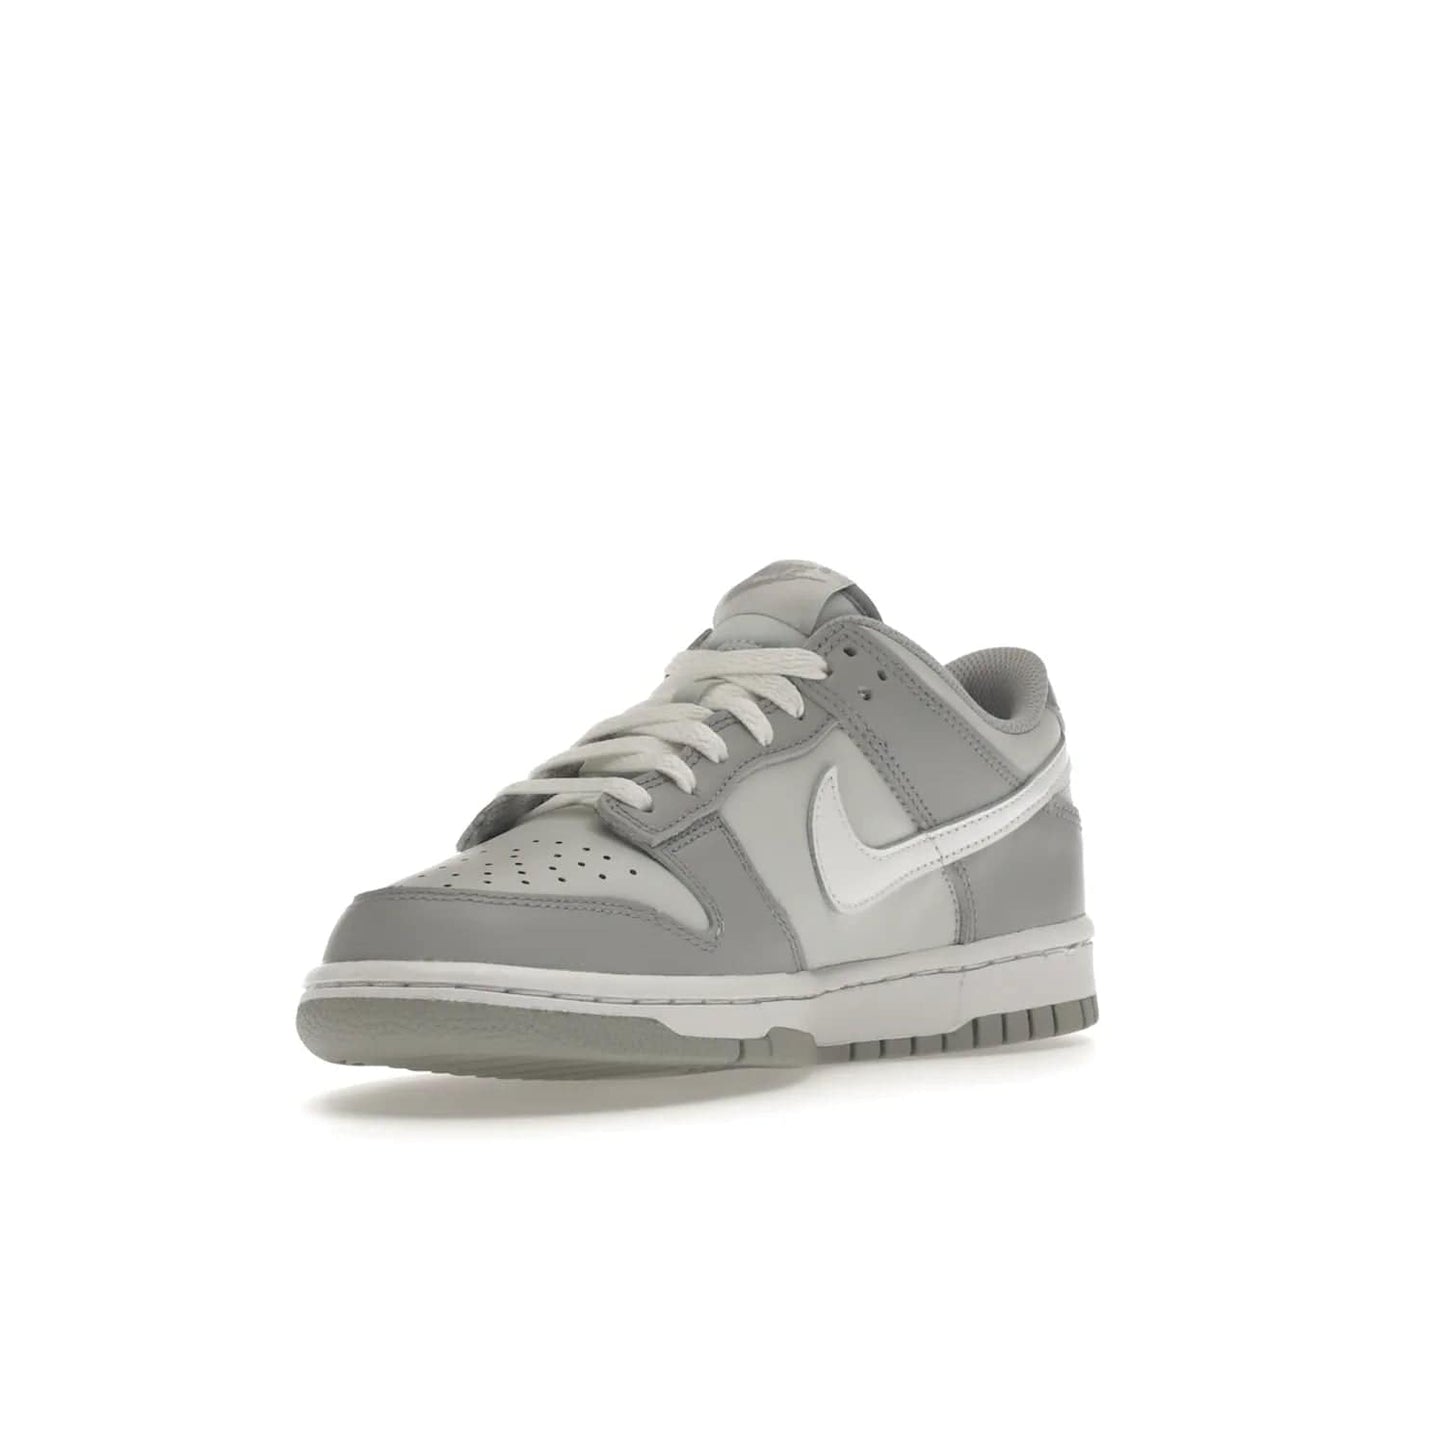 Nike Dunk Low Two-Toned Grey (GS) - Image 14 - Only at www.BallersClubKickz.com - Stylish Nike Dunk Low GS Two-Toned Grey featuring leather build, light/dark grey shades, white Swoosh logo & gray rubber outsole. Get ready to make a statement with this timeless classic released in March 2022.